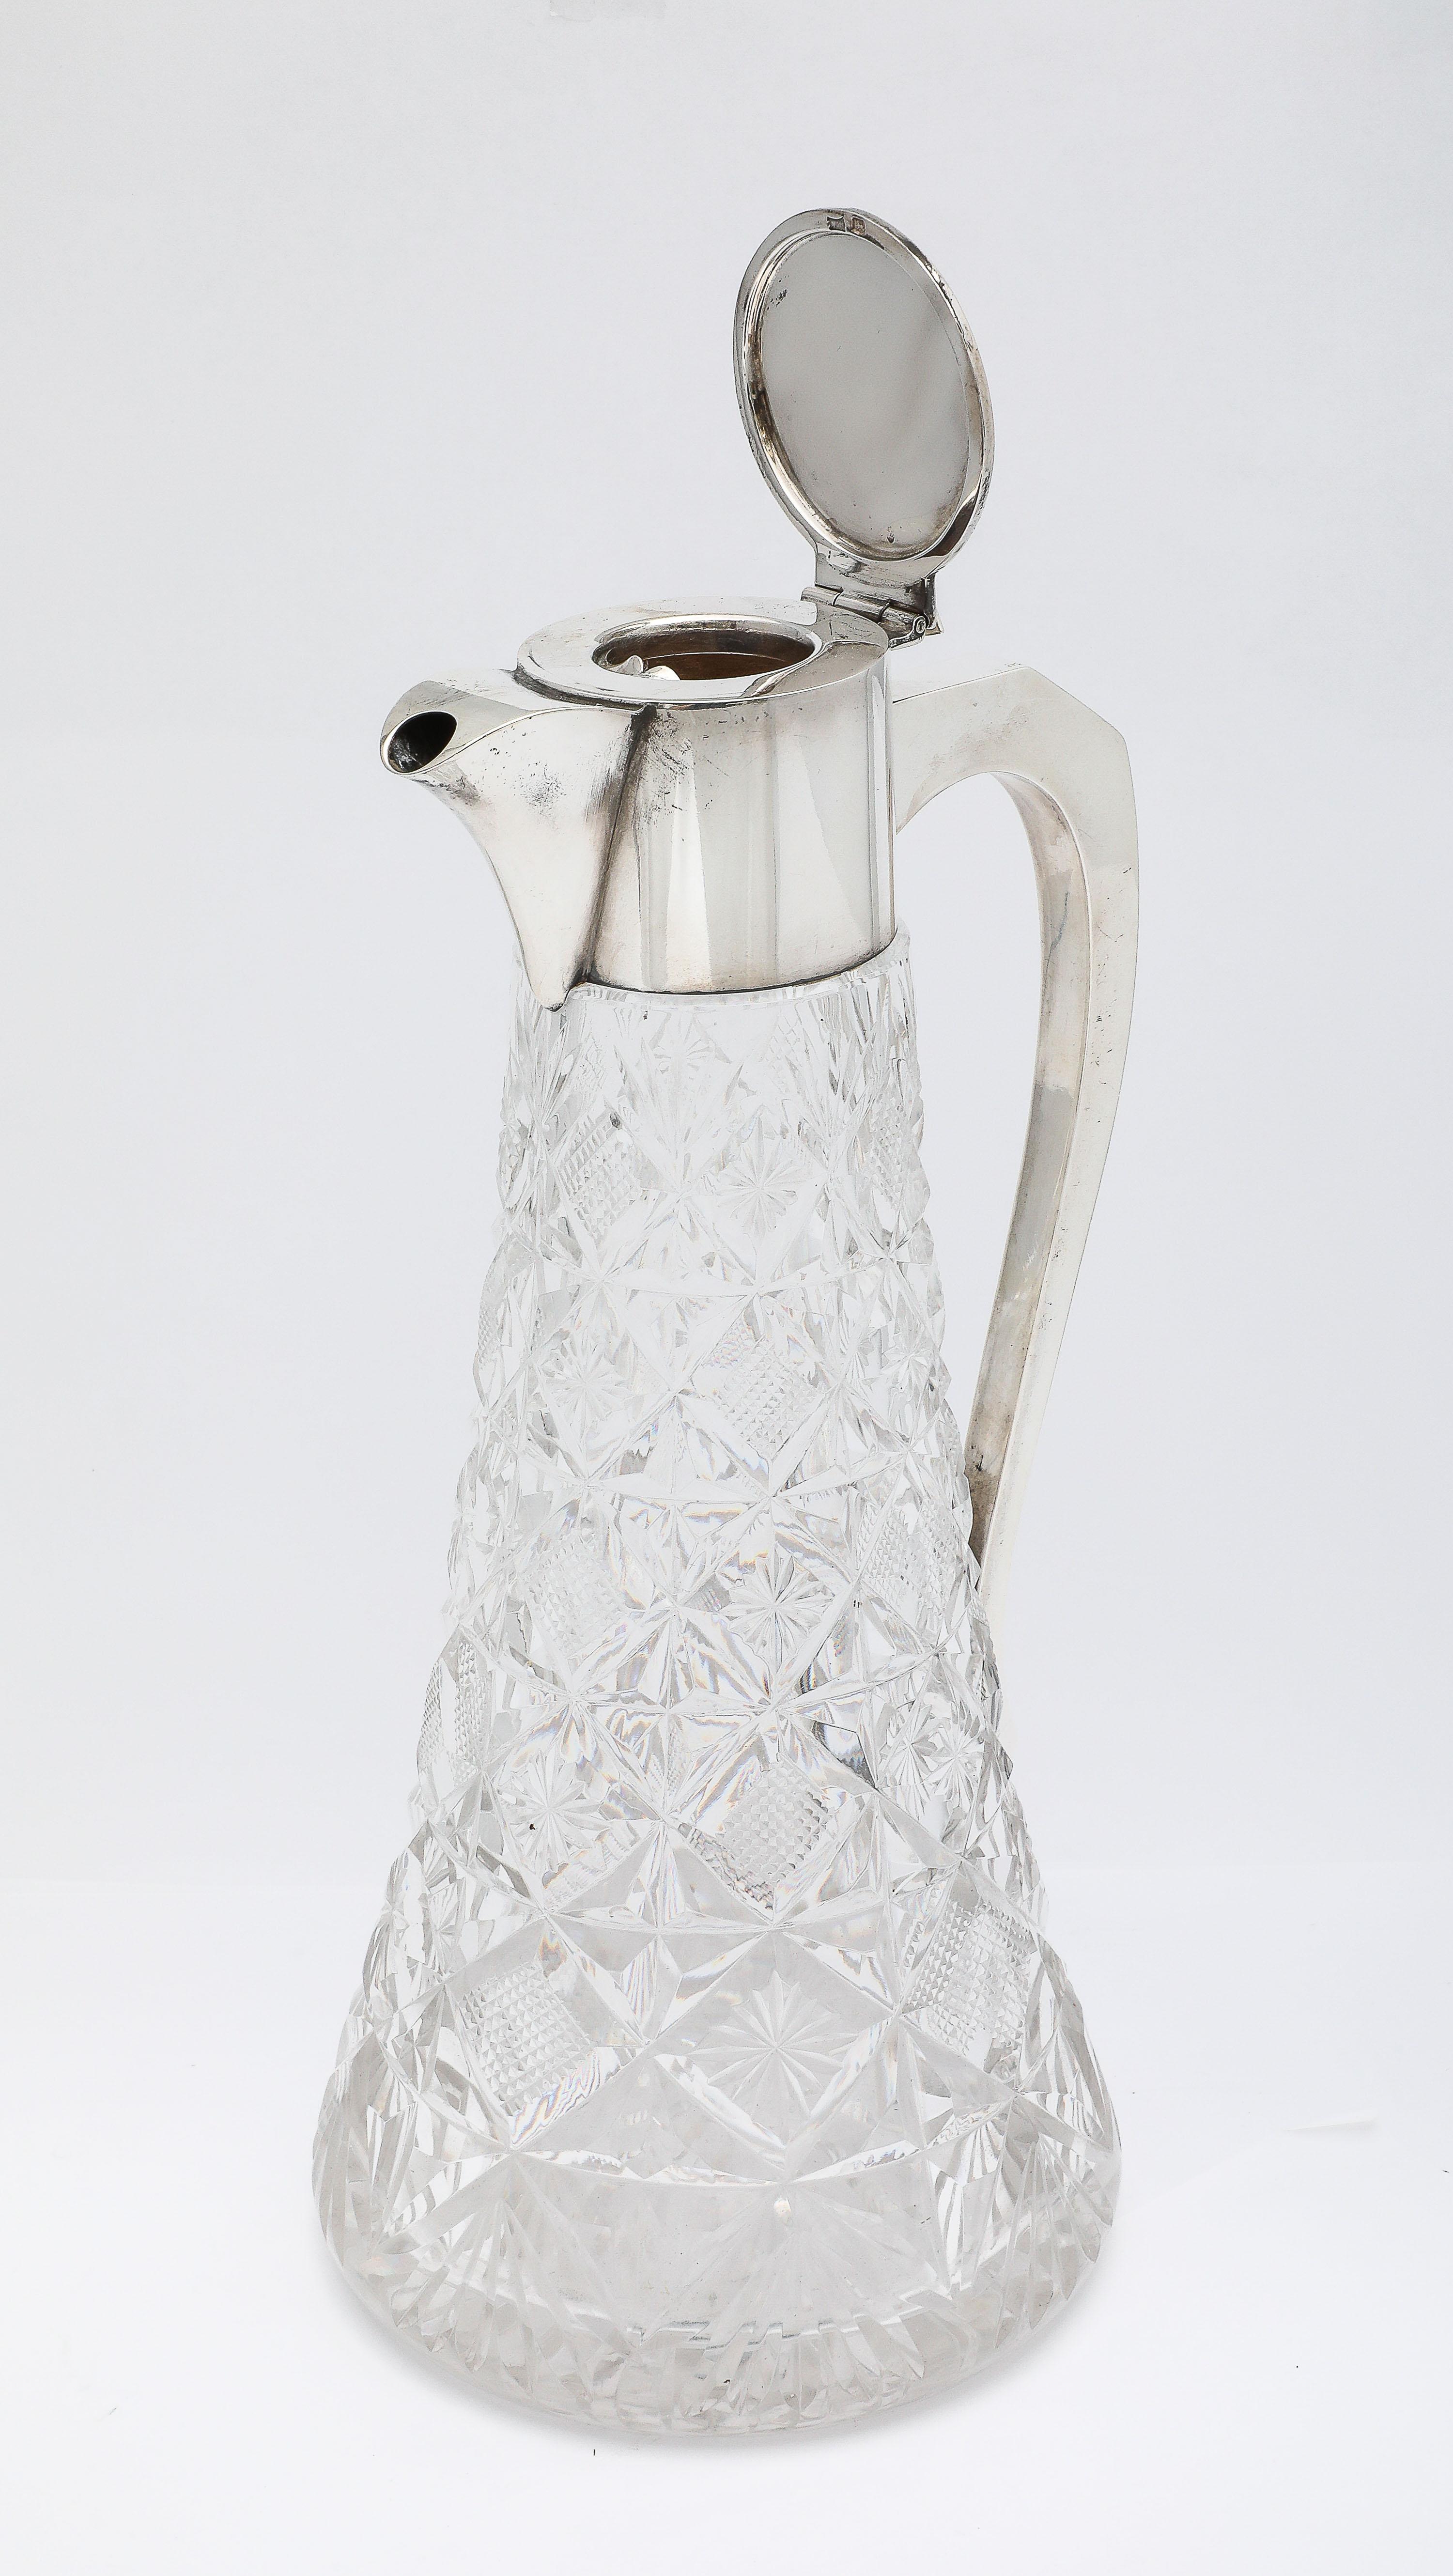 Large Edwardian Period Sterling Silver-Mounted Claret Jug For Sale 8